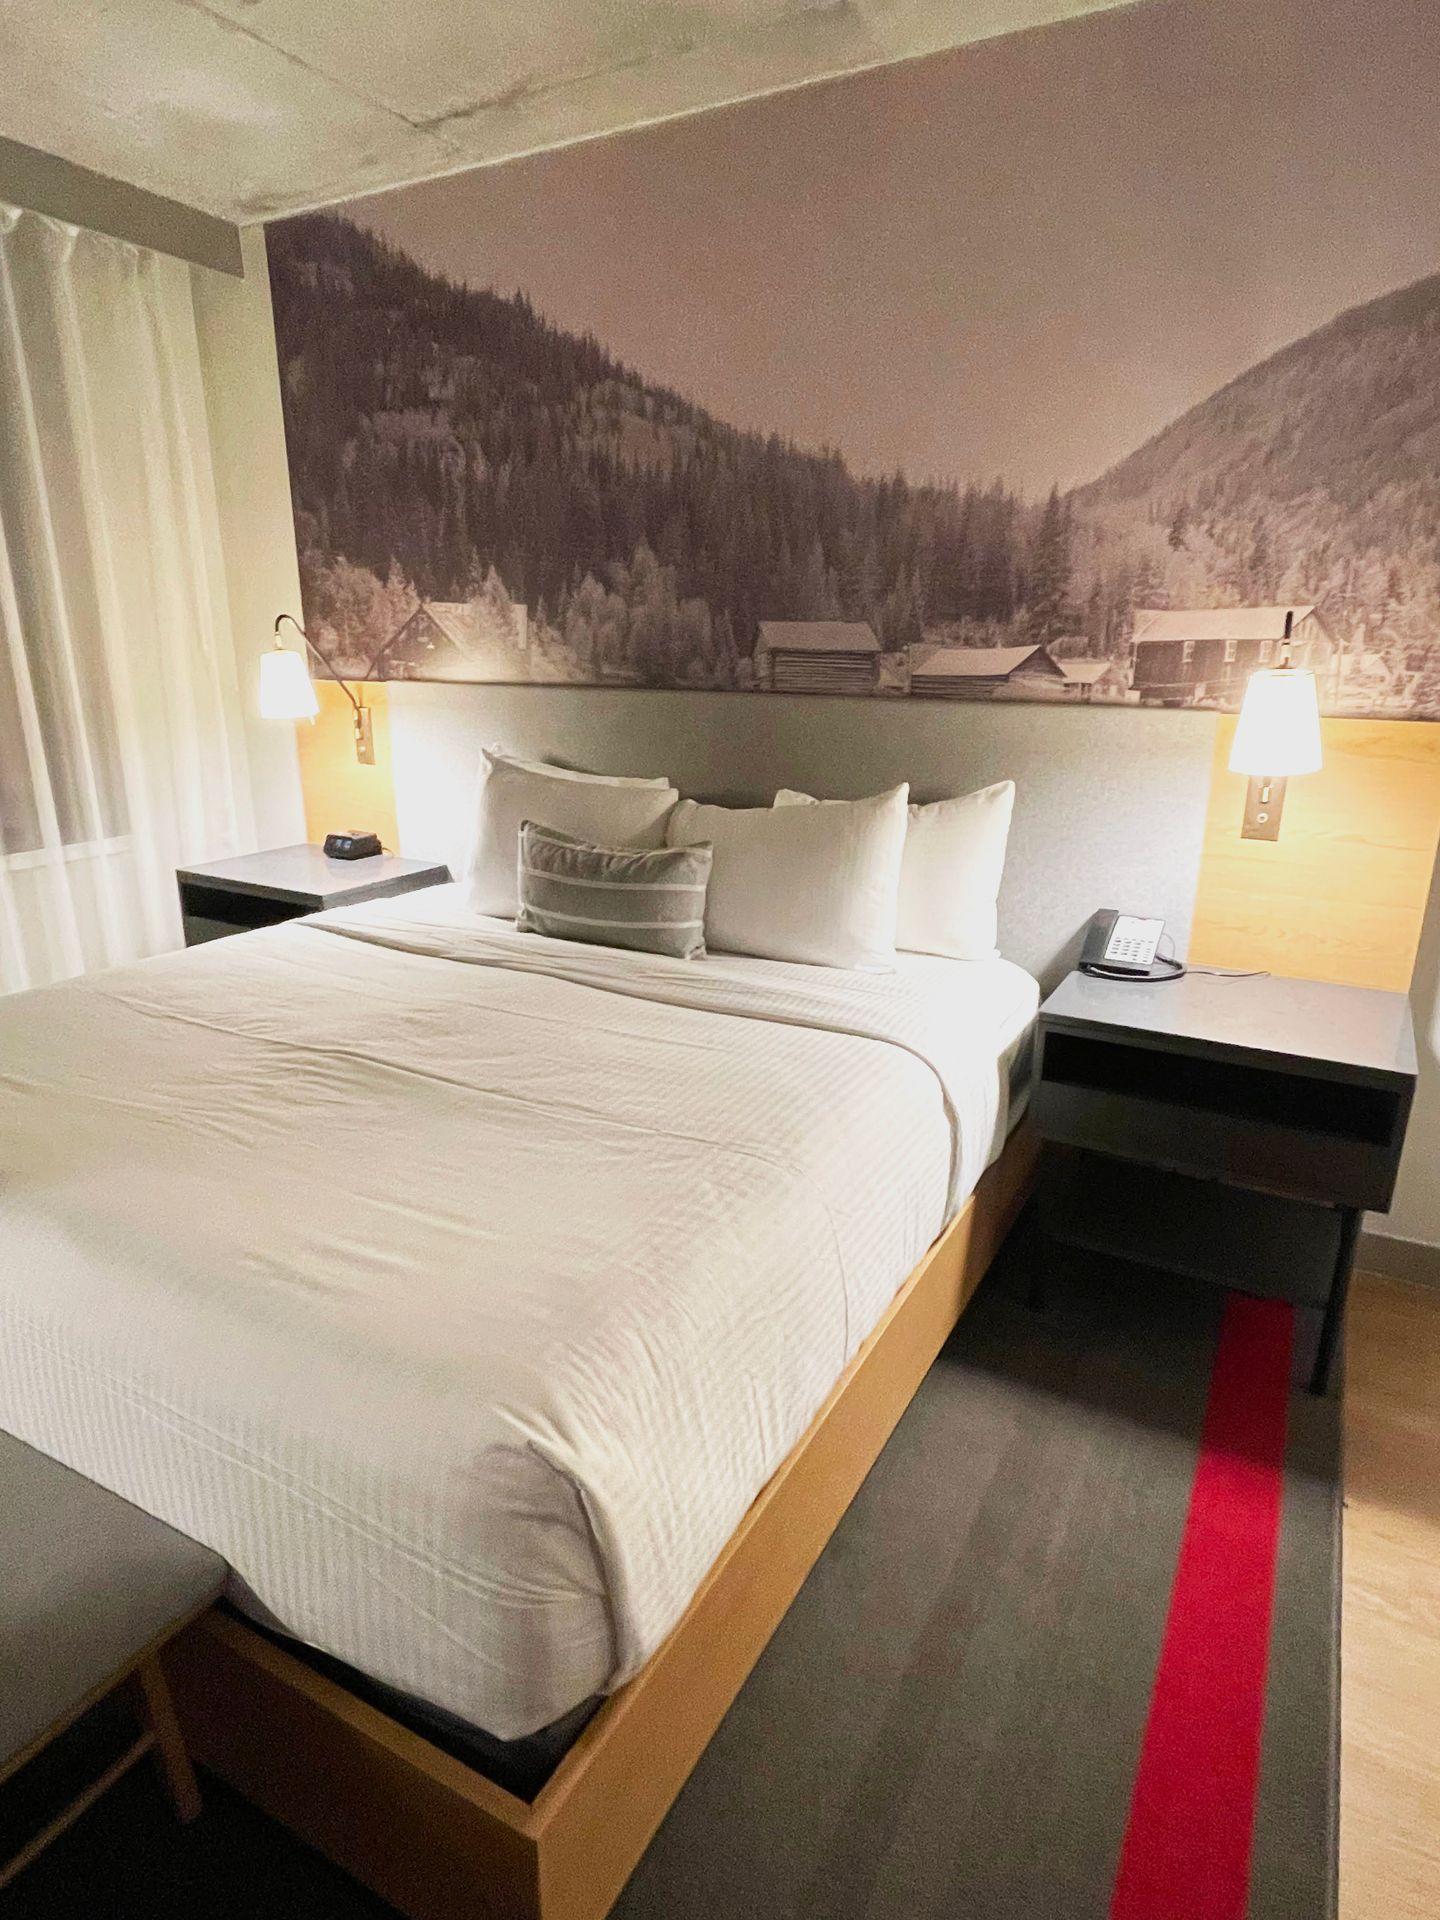 A hotel room with a neatly made bed and a grayscale mountain photo on the wall behind the bed.